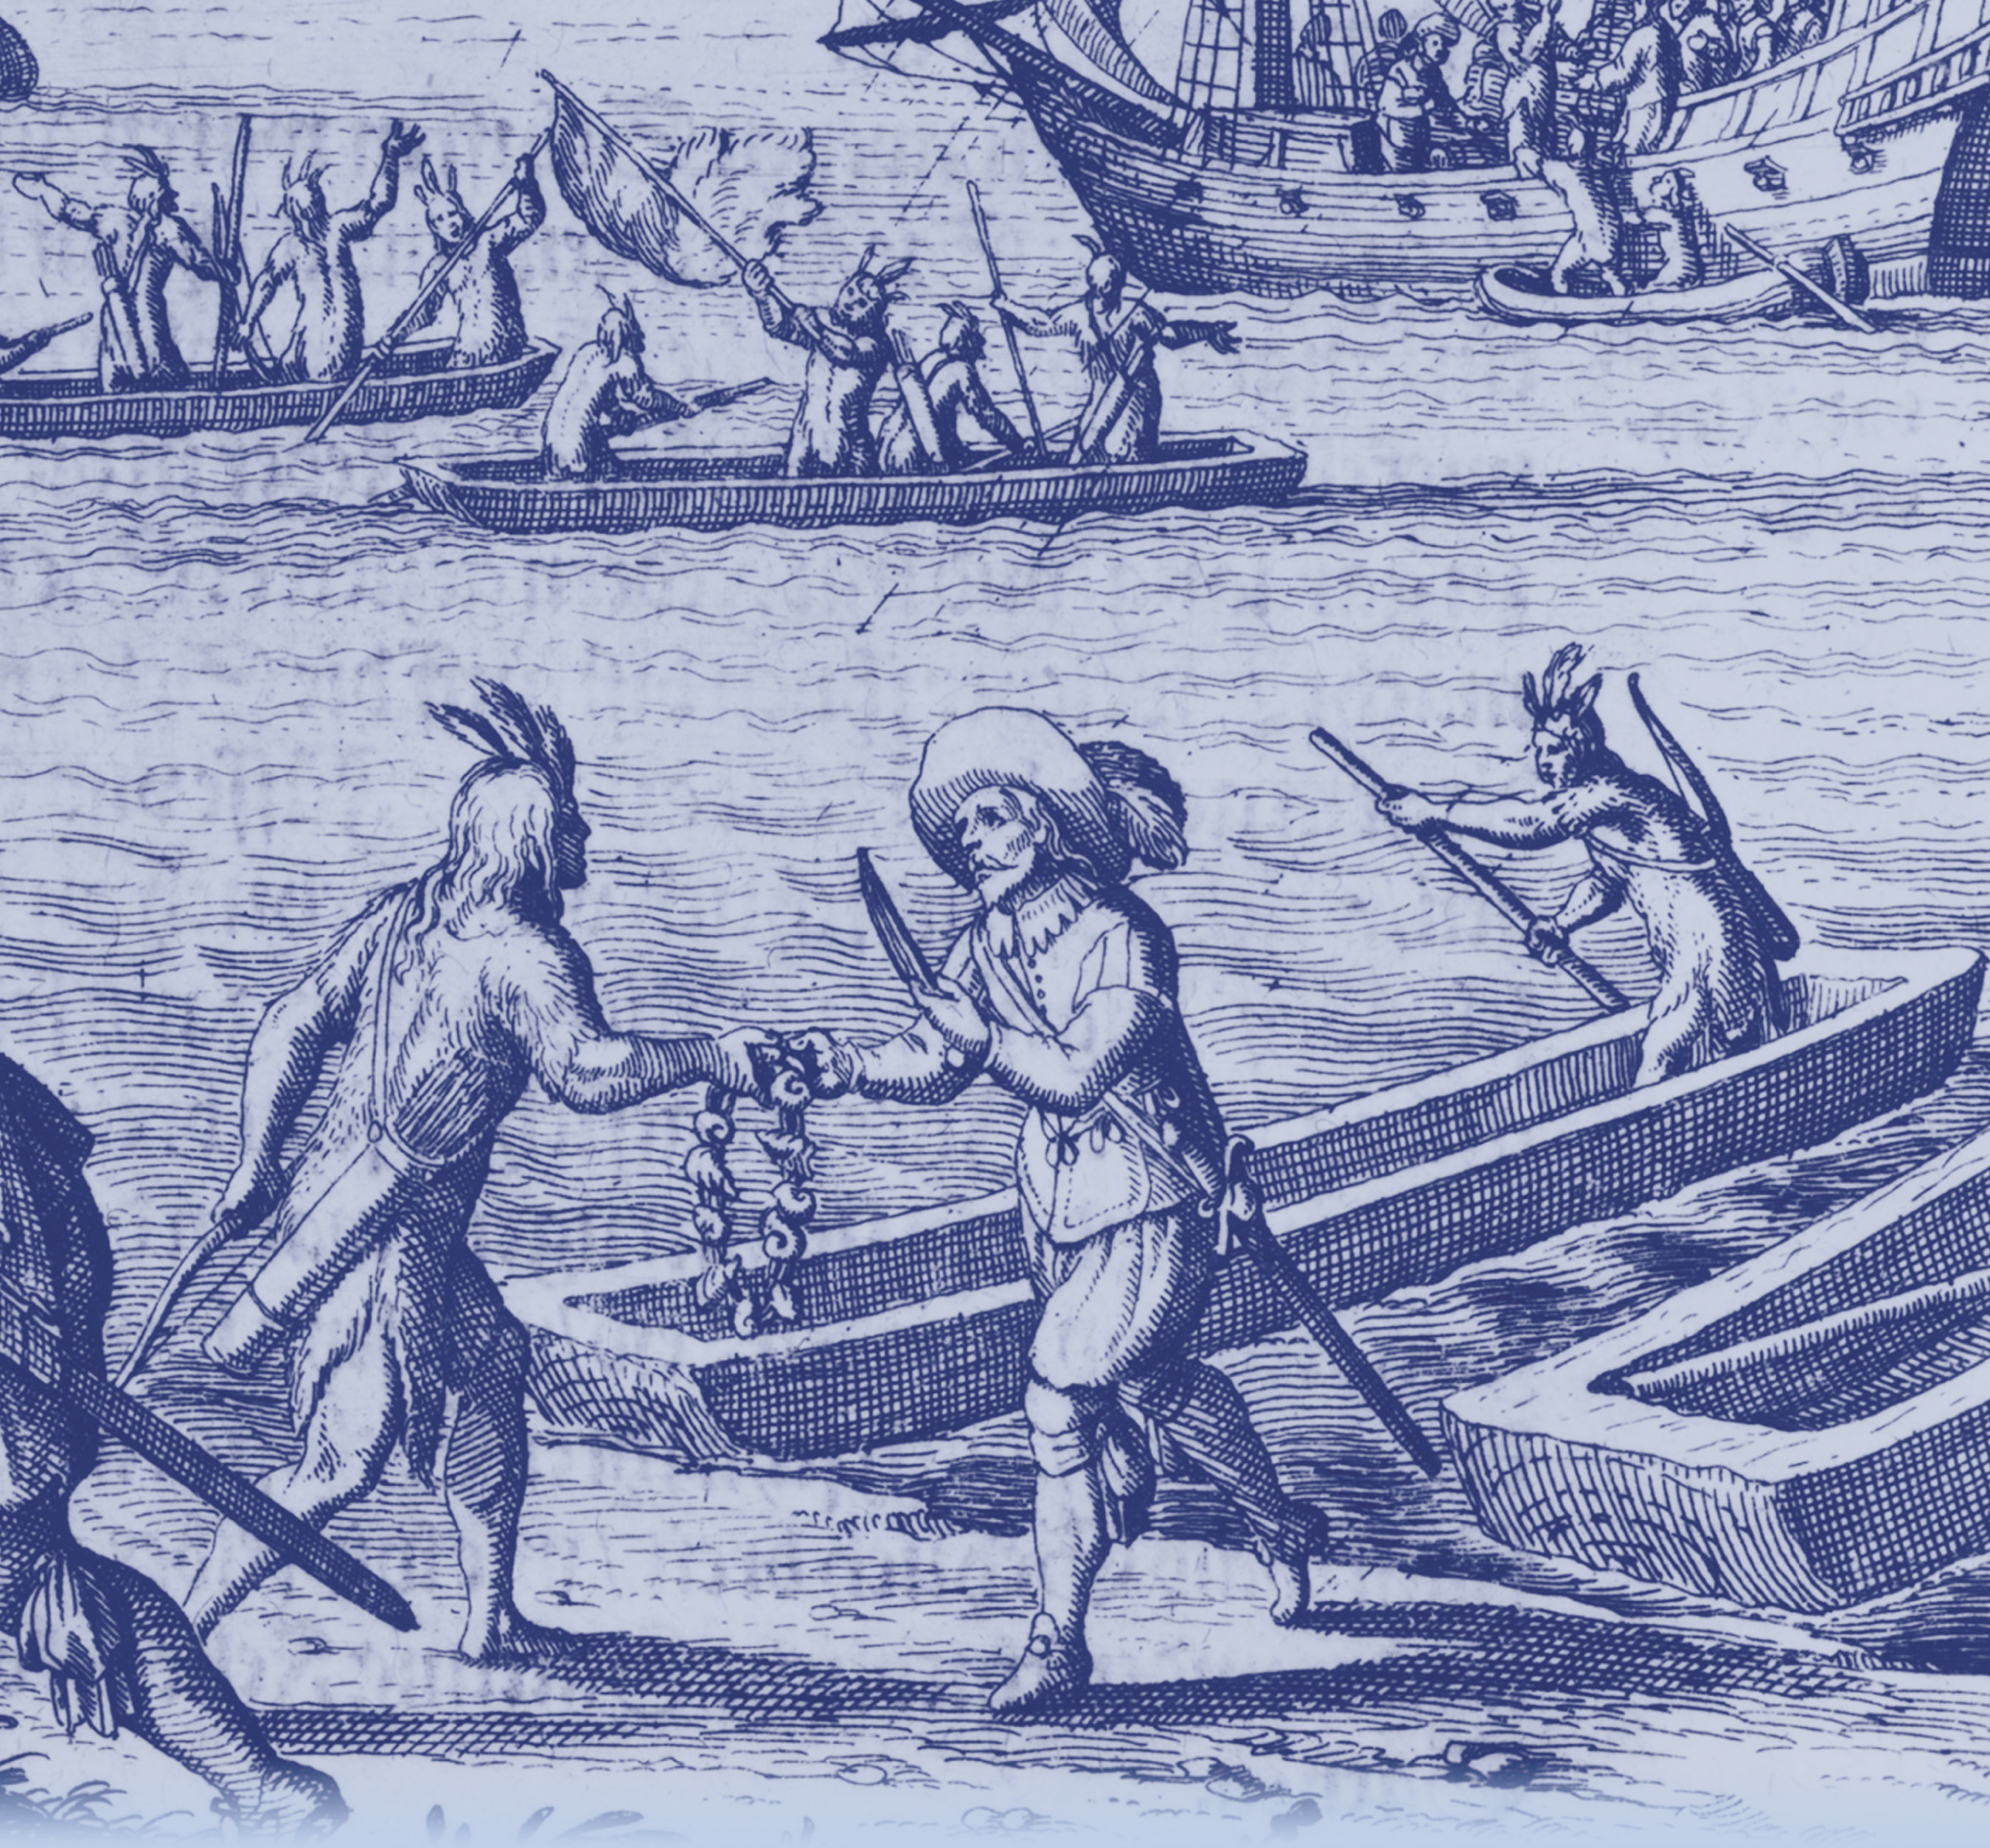 Illustration: explorers trade with Native Americans. A title: The American Colonies Emerge.